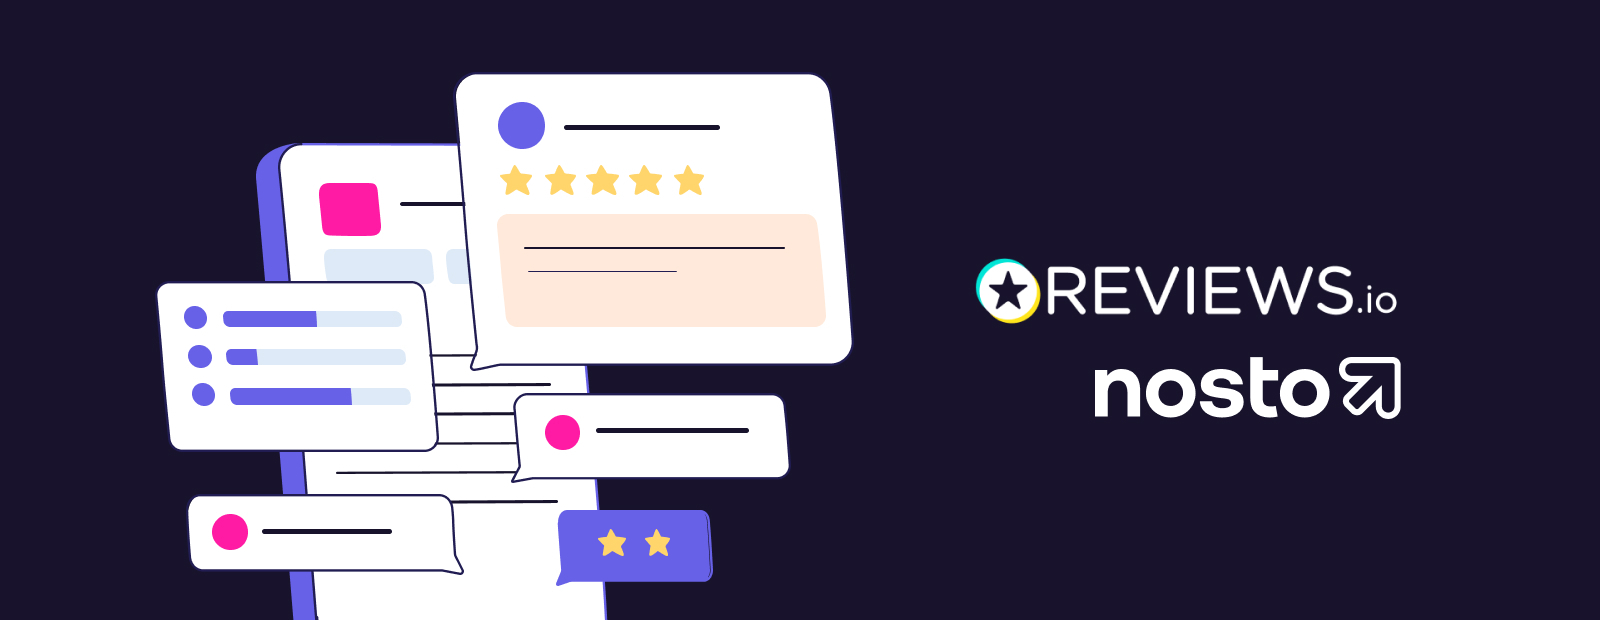 Nosto and REVIEWS.io launch new integration, boosting ecommerce conversions by combining product discovery with social proof